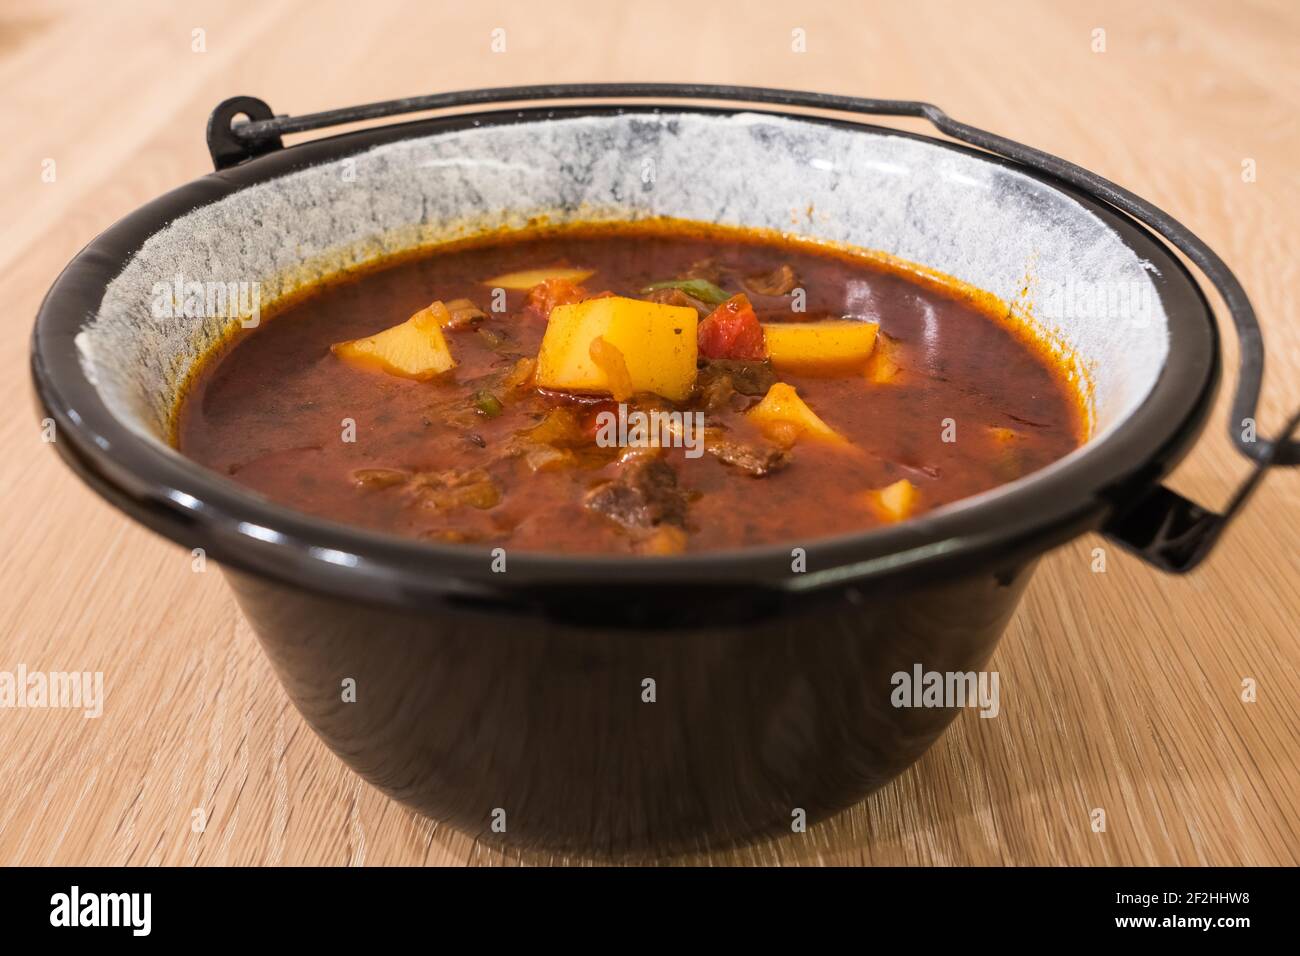 Hungarian Beef Goulash or Gulyas Soup or Stew Served in a Small Cauldron with Potatoes, Meat, Paprika and Pepper Stock Photo